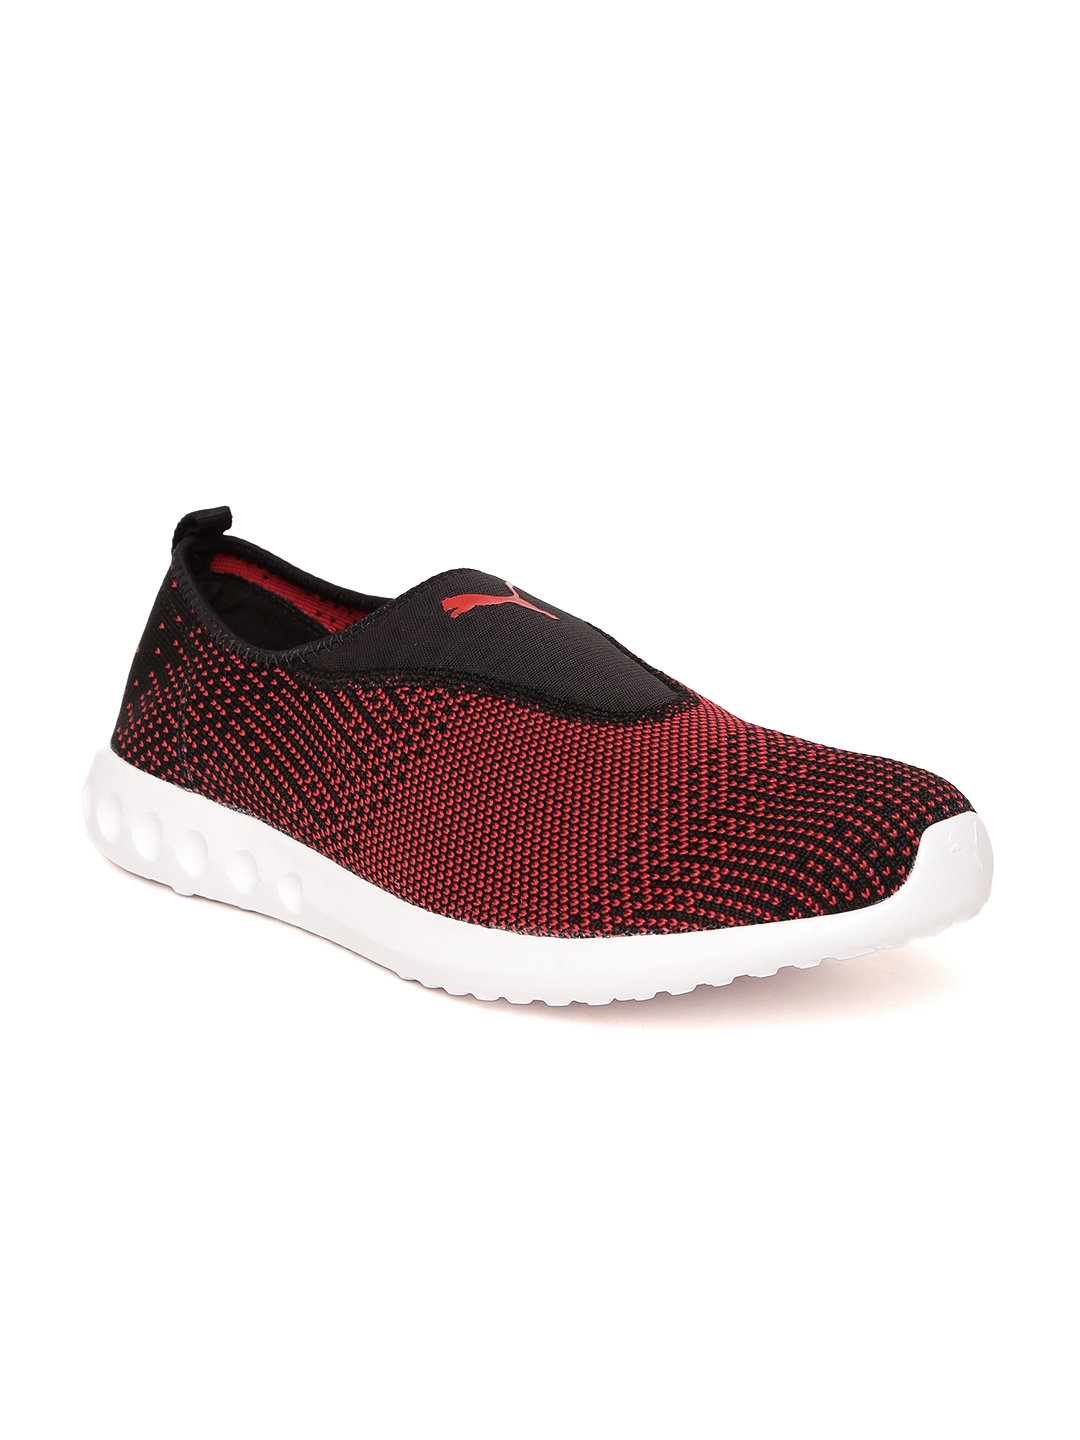 puma carson runner red and black